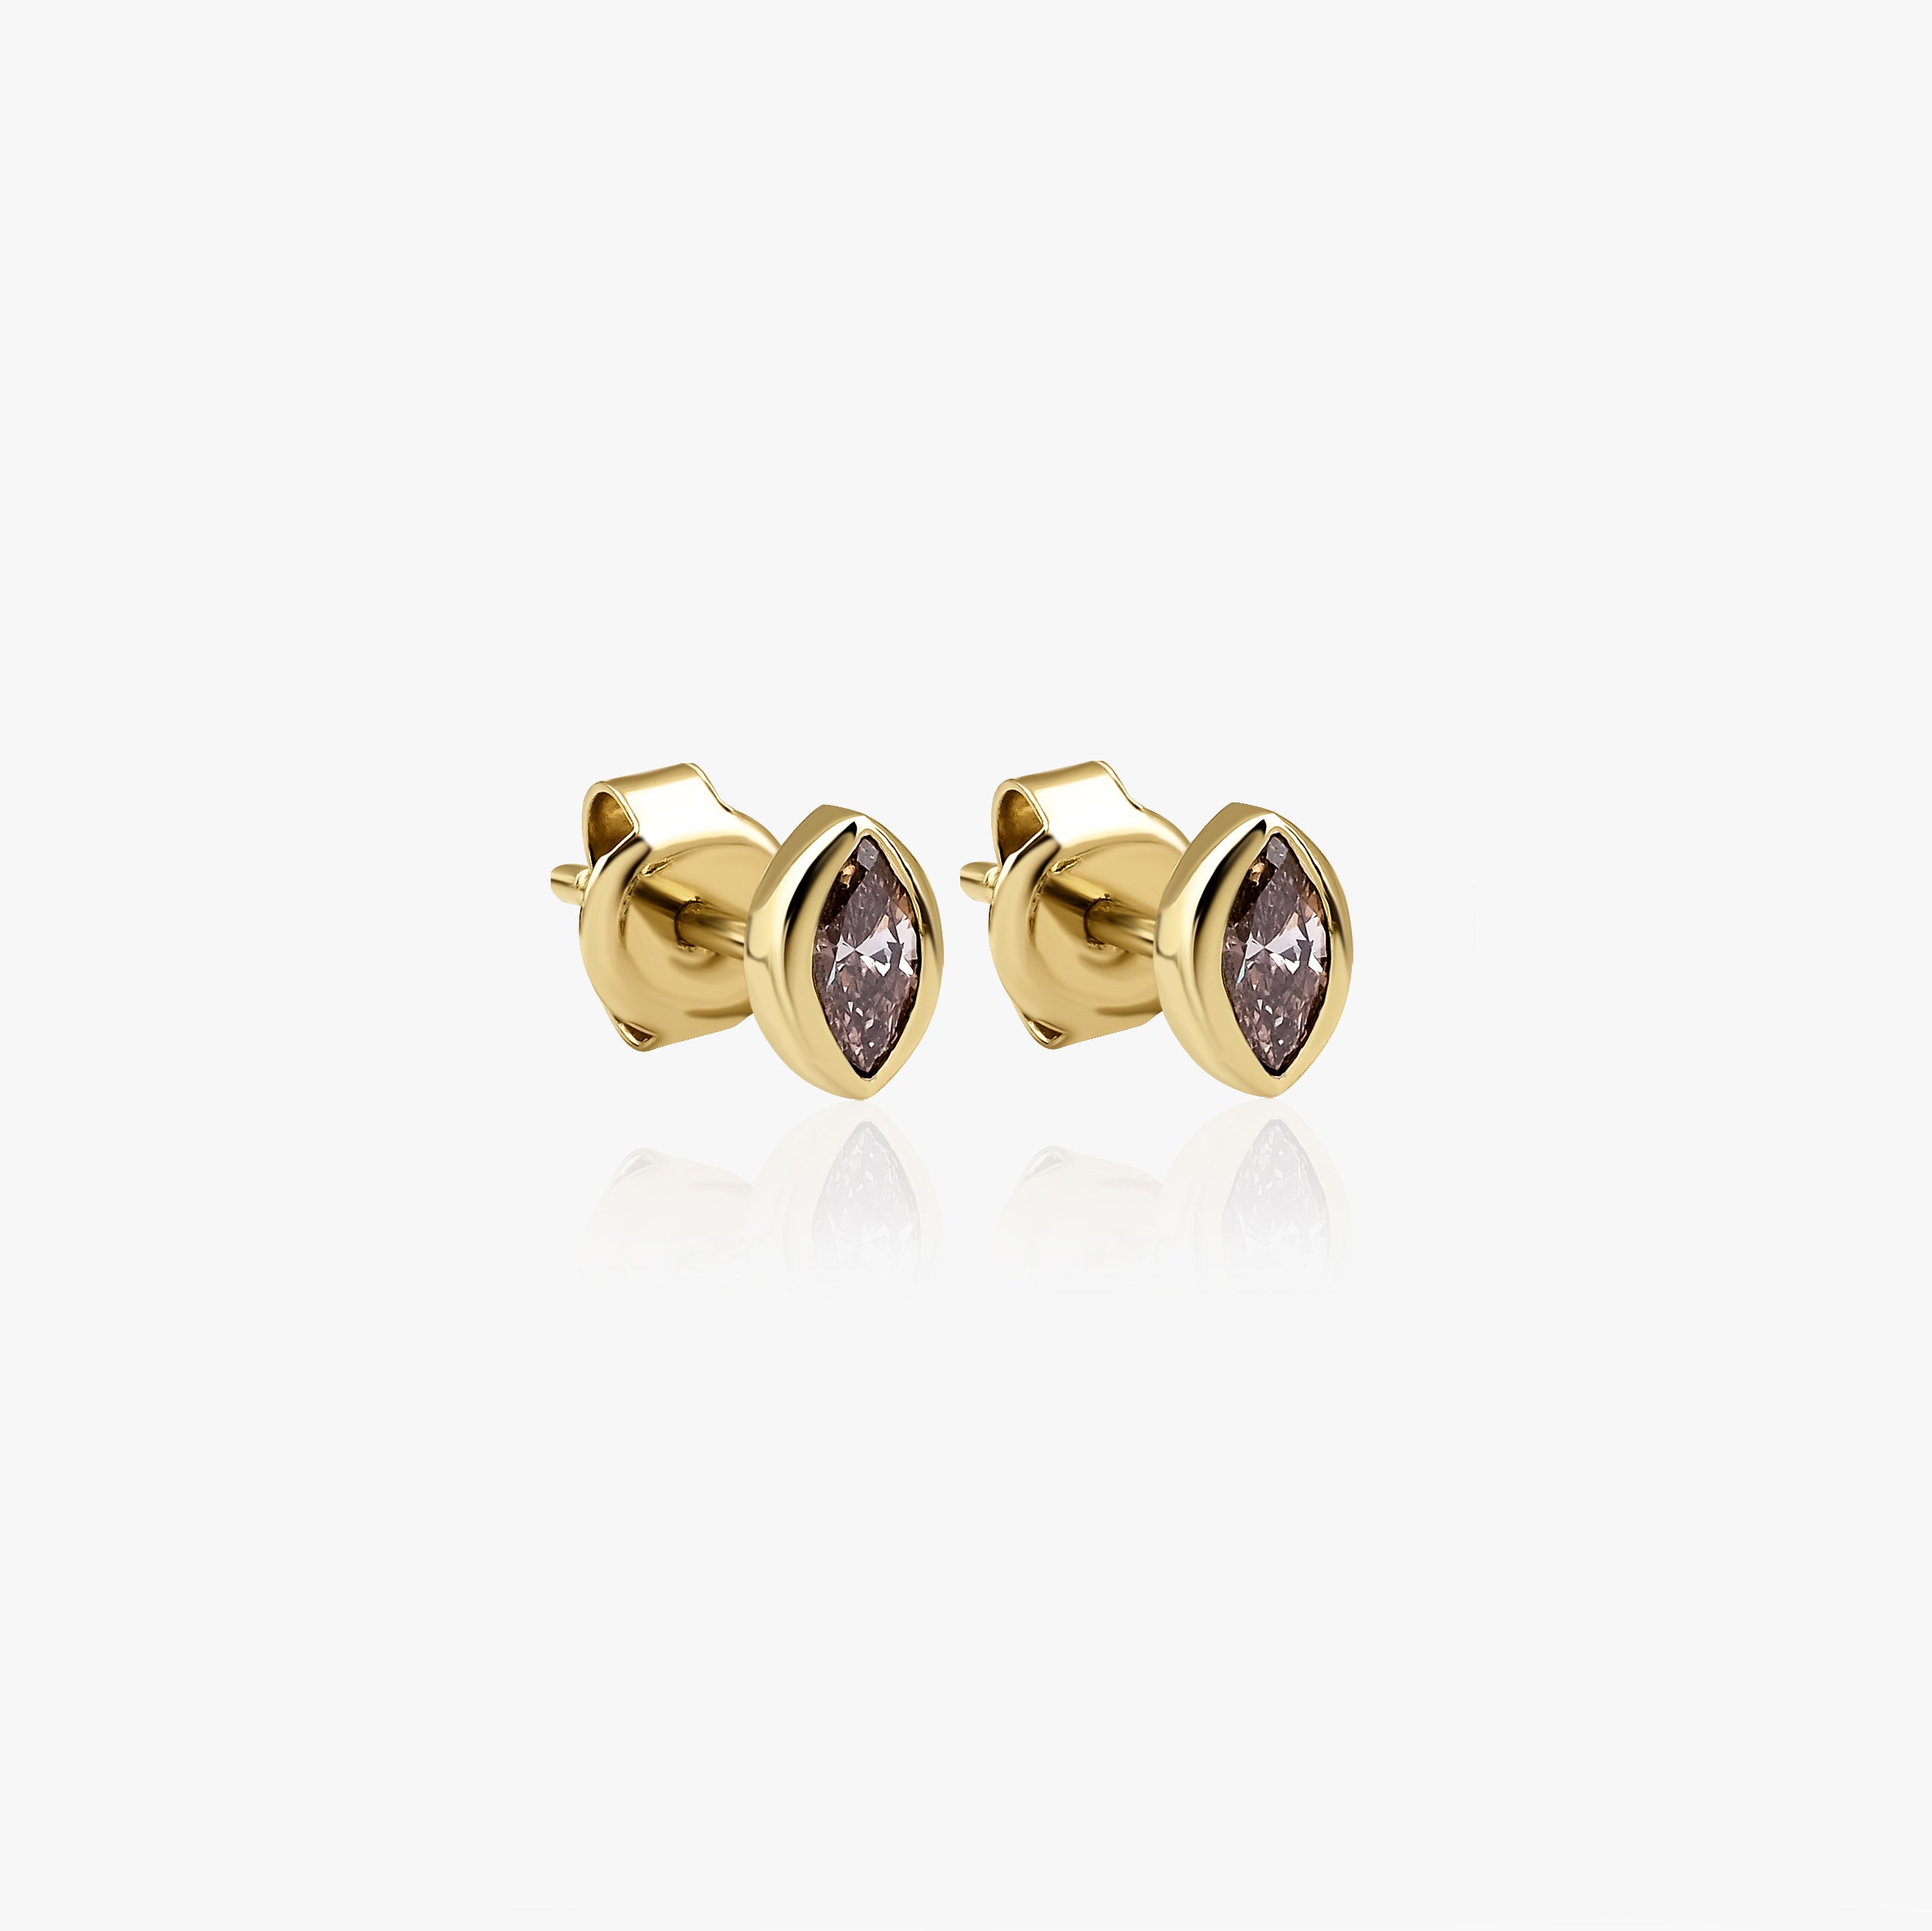 Marquise Chocolate Diamond Stud Earrings Available in 14K and 18K Gold